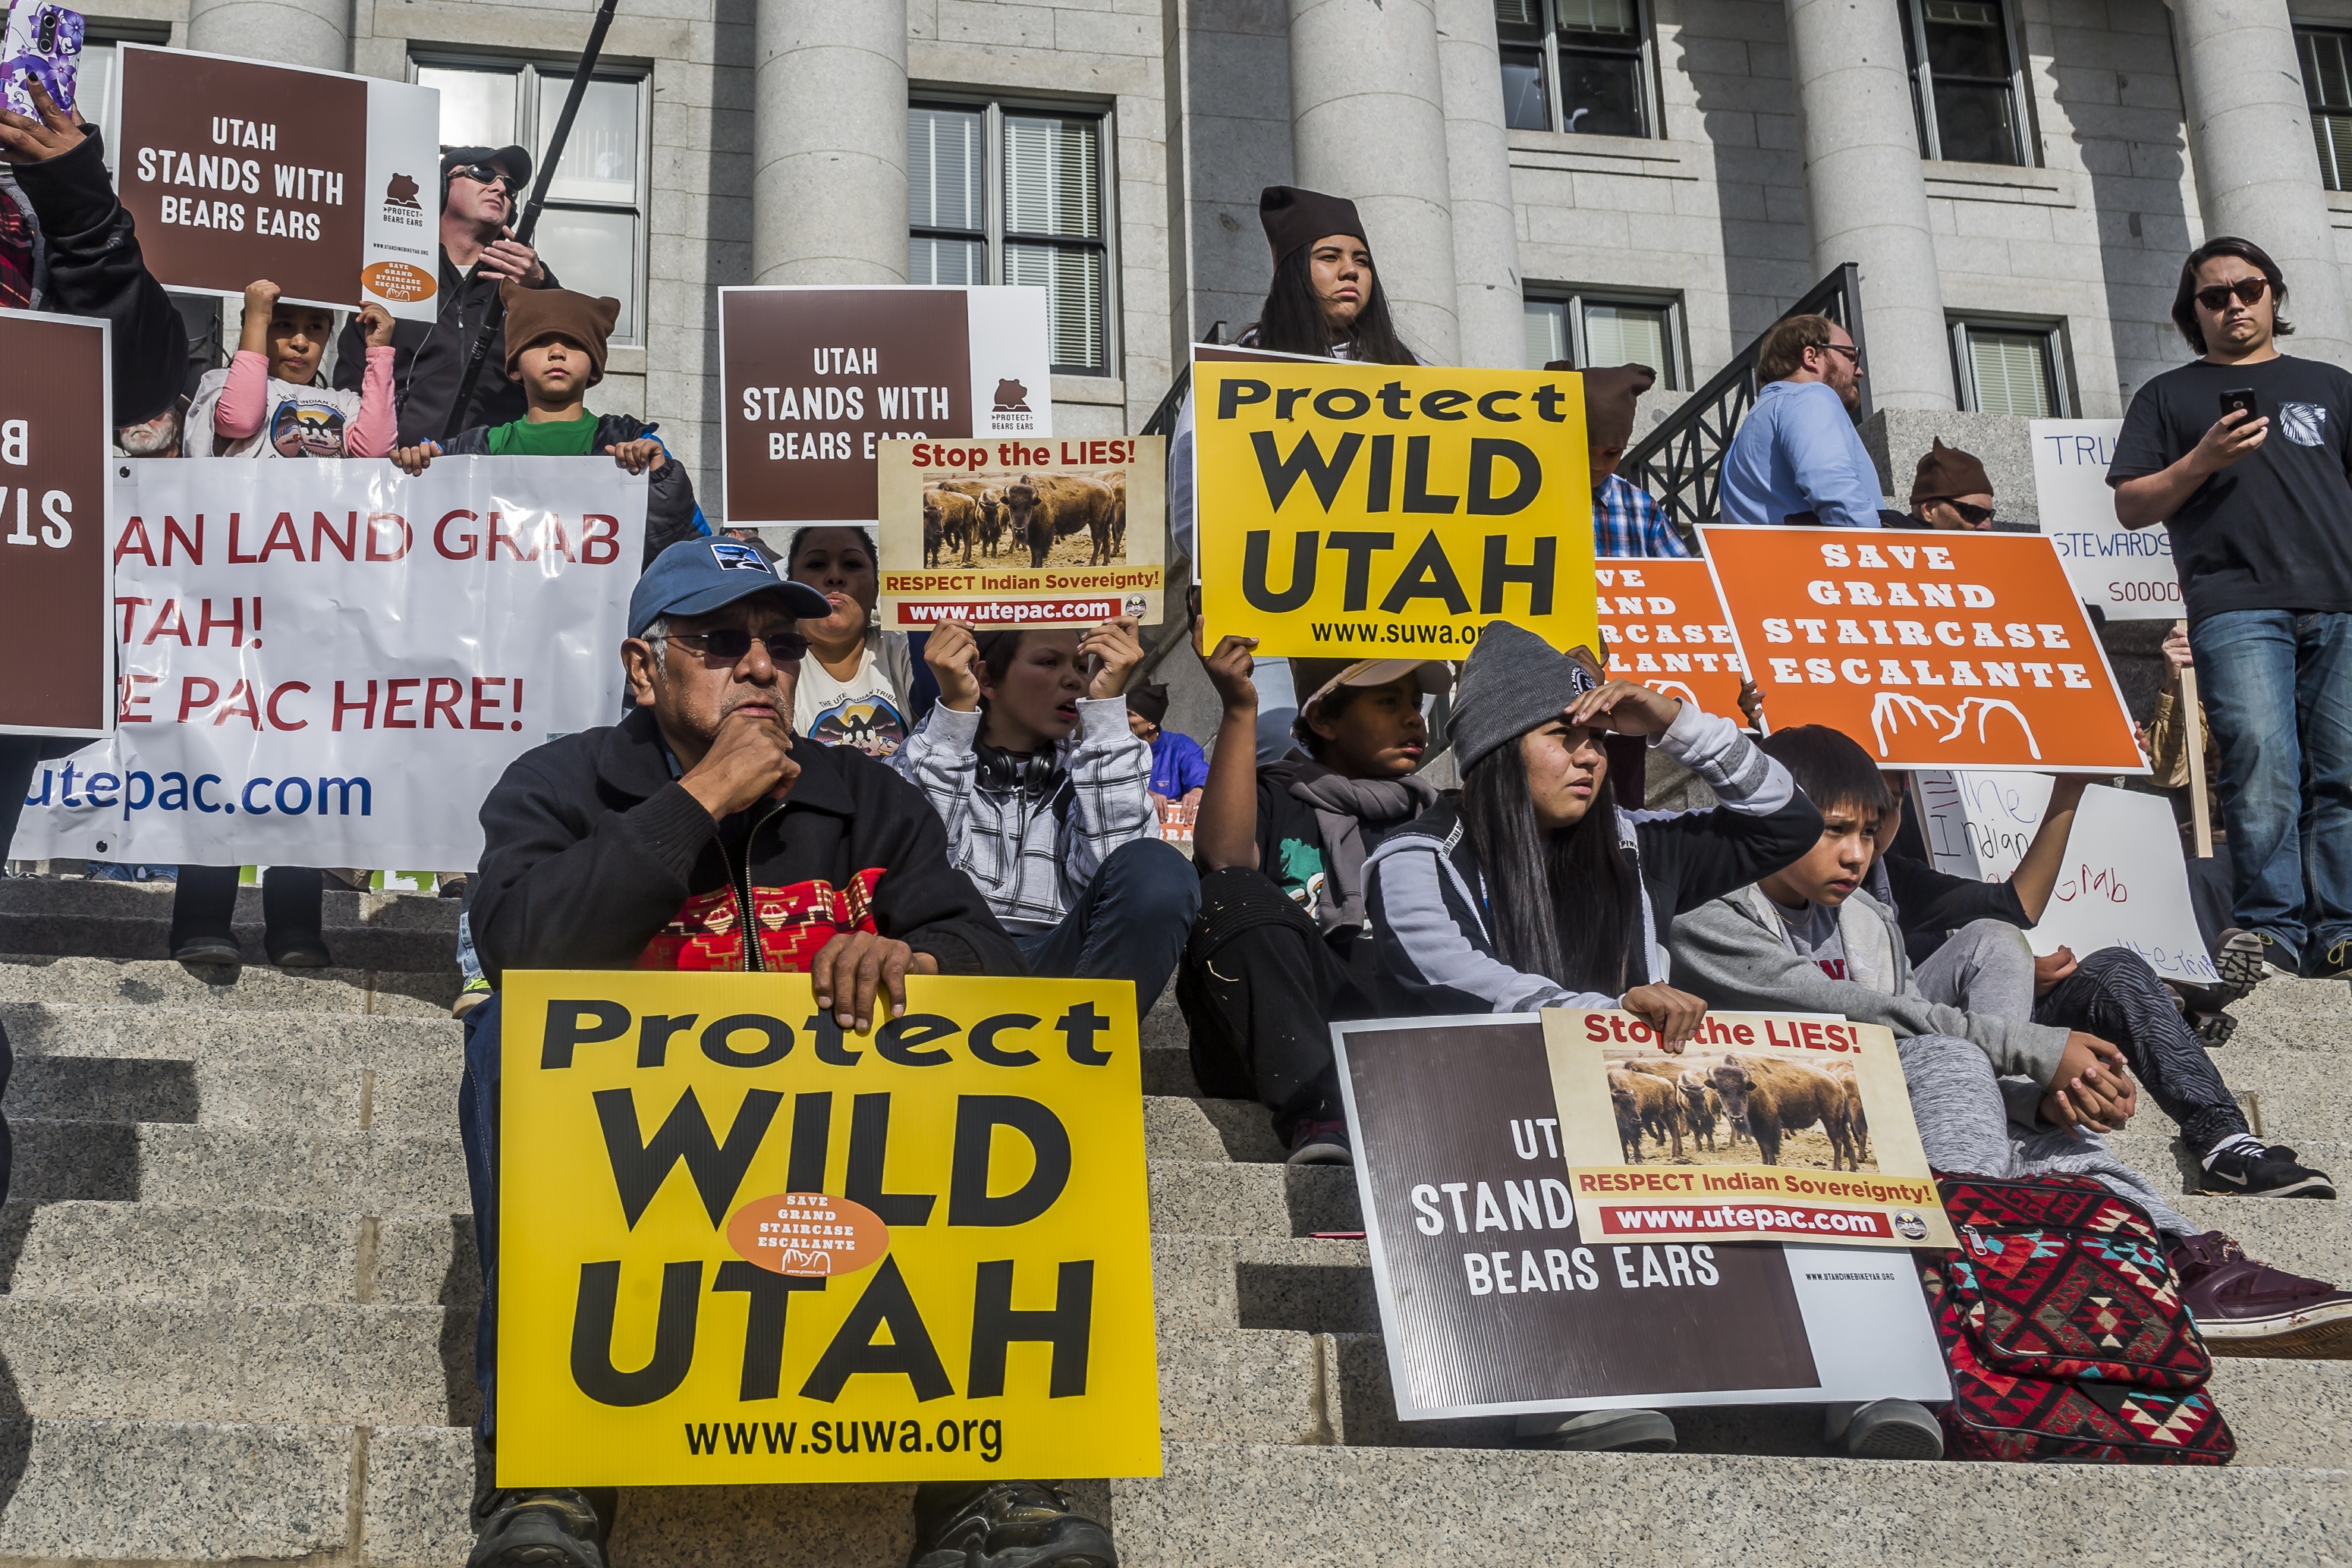 People sit on the capital building’s stone steps holding signs saying “Protect Wild Utah” and “Utah Stands With Bears Ears.”